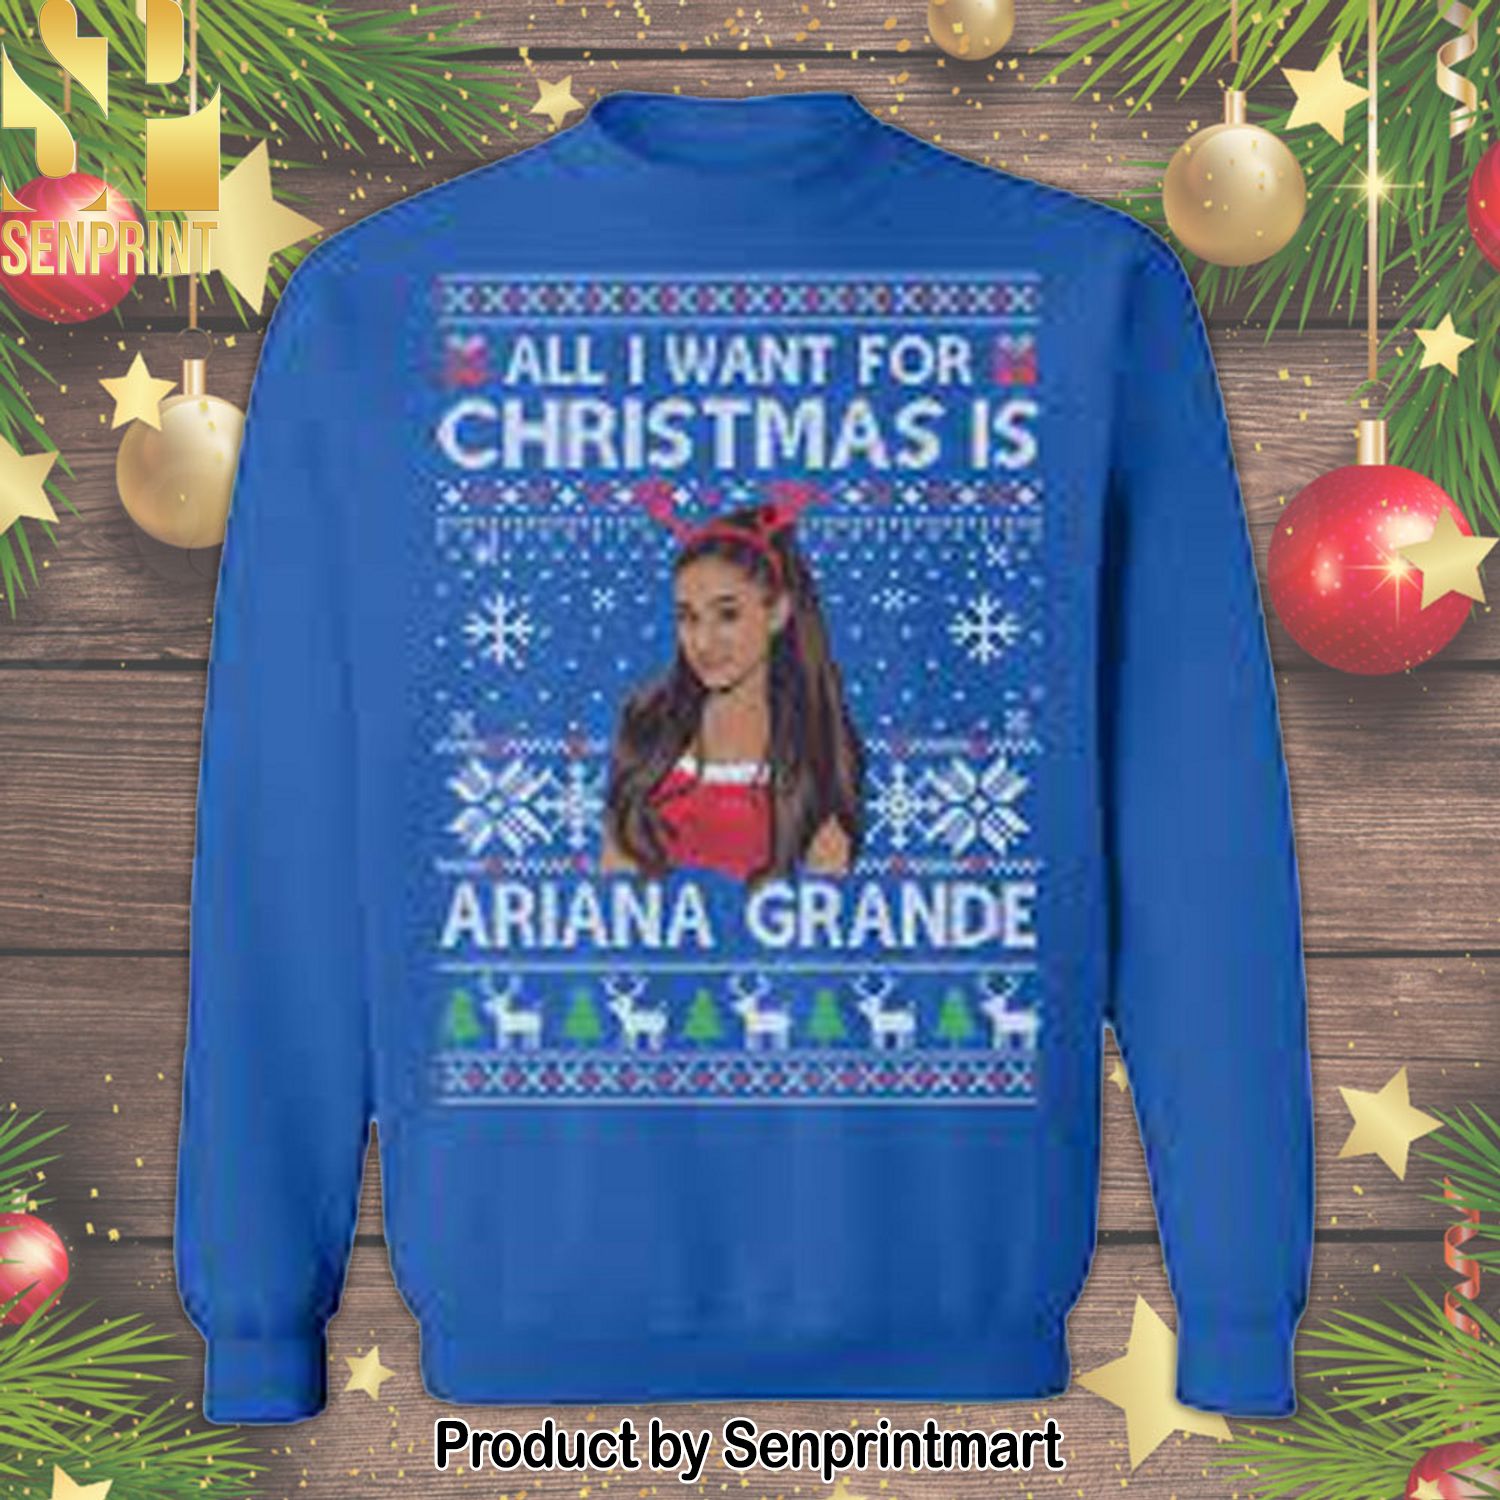 Ariana Grande 3D Printed Ugly Christmas Sweater